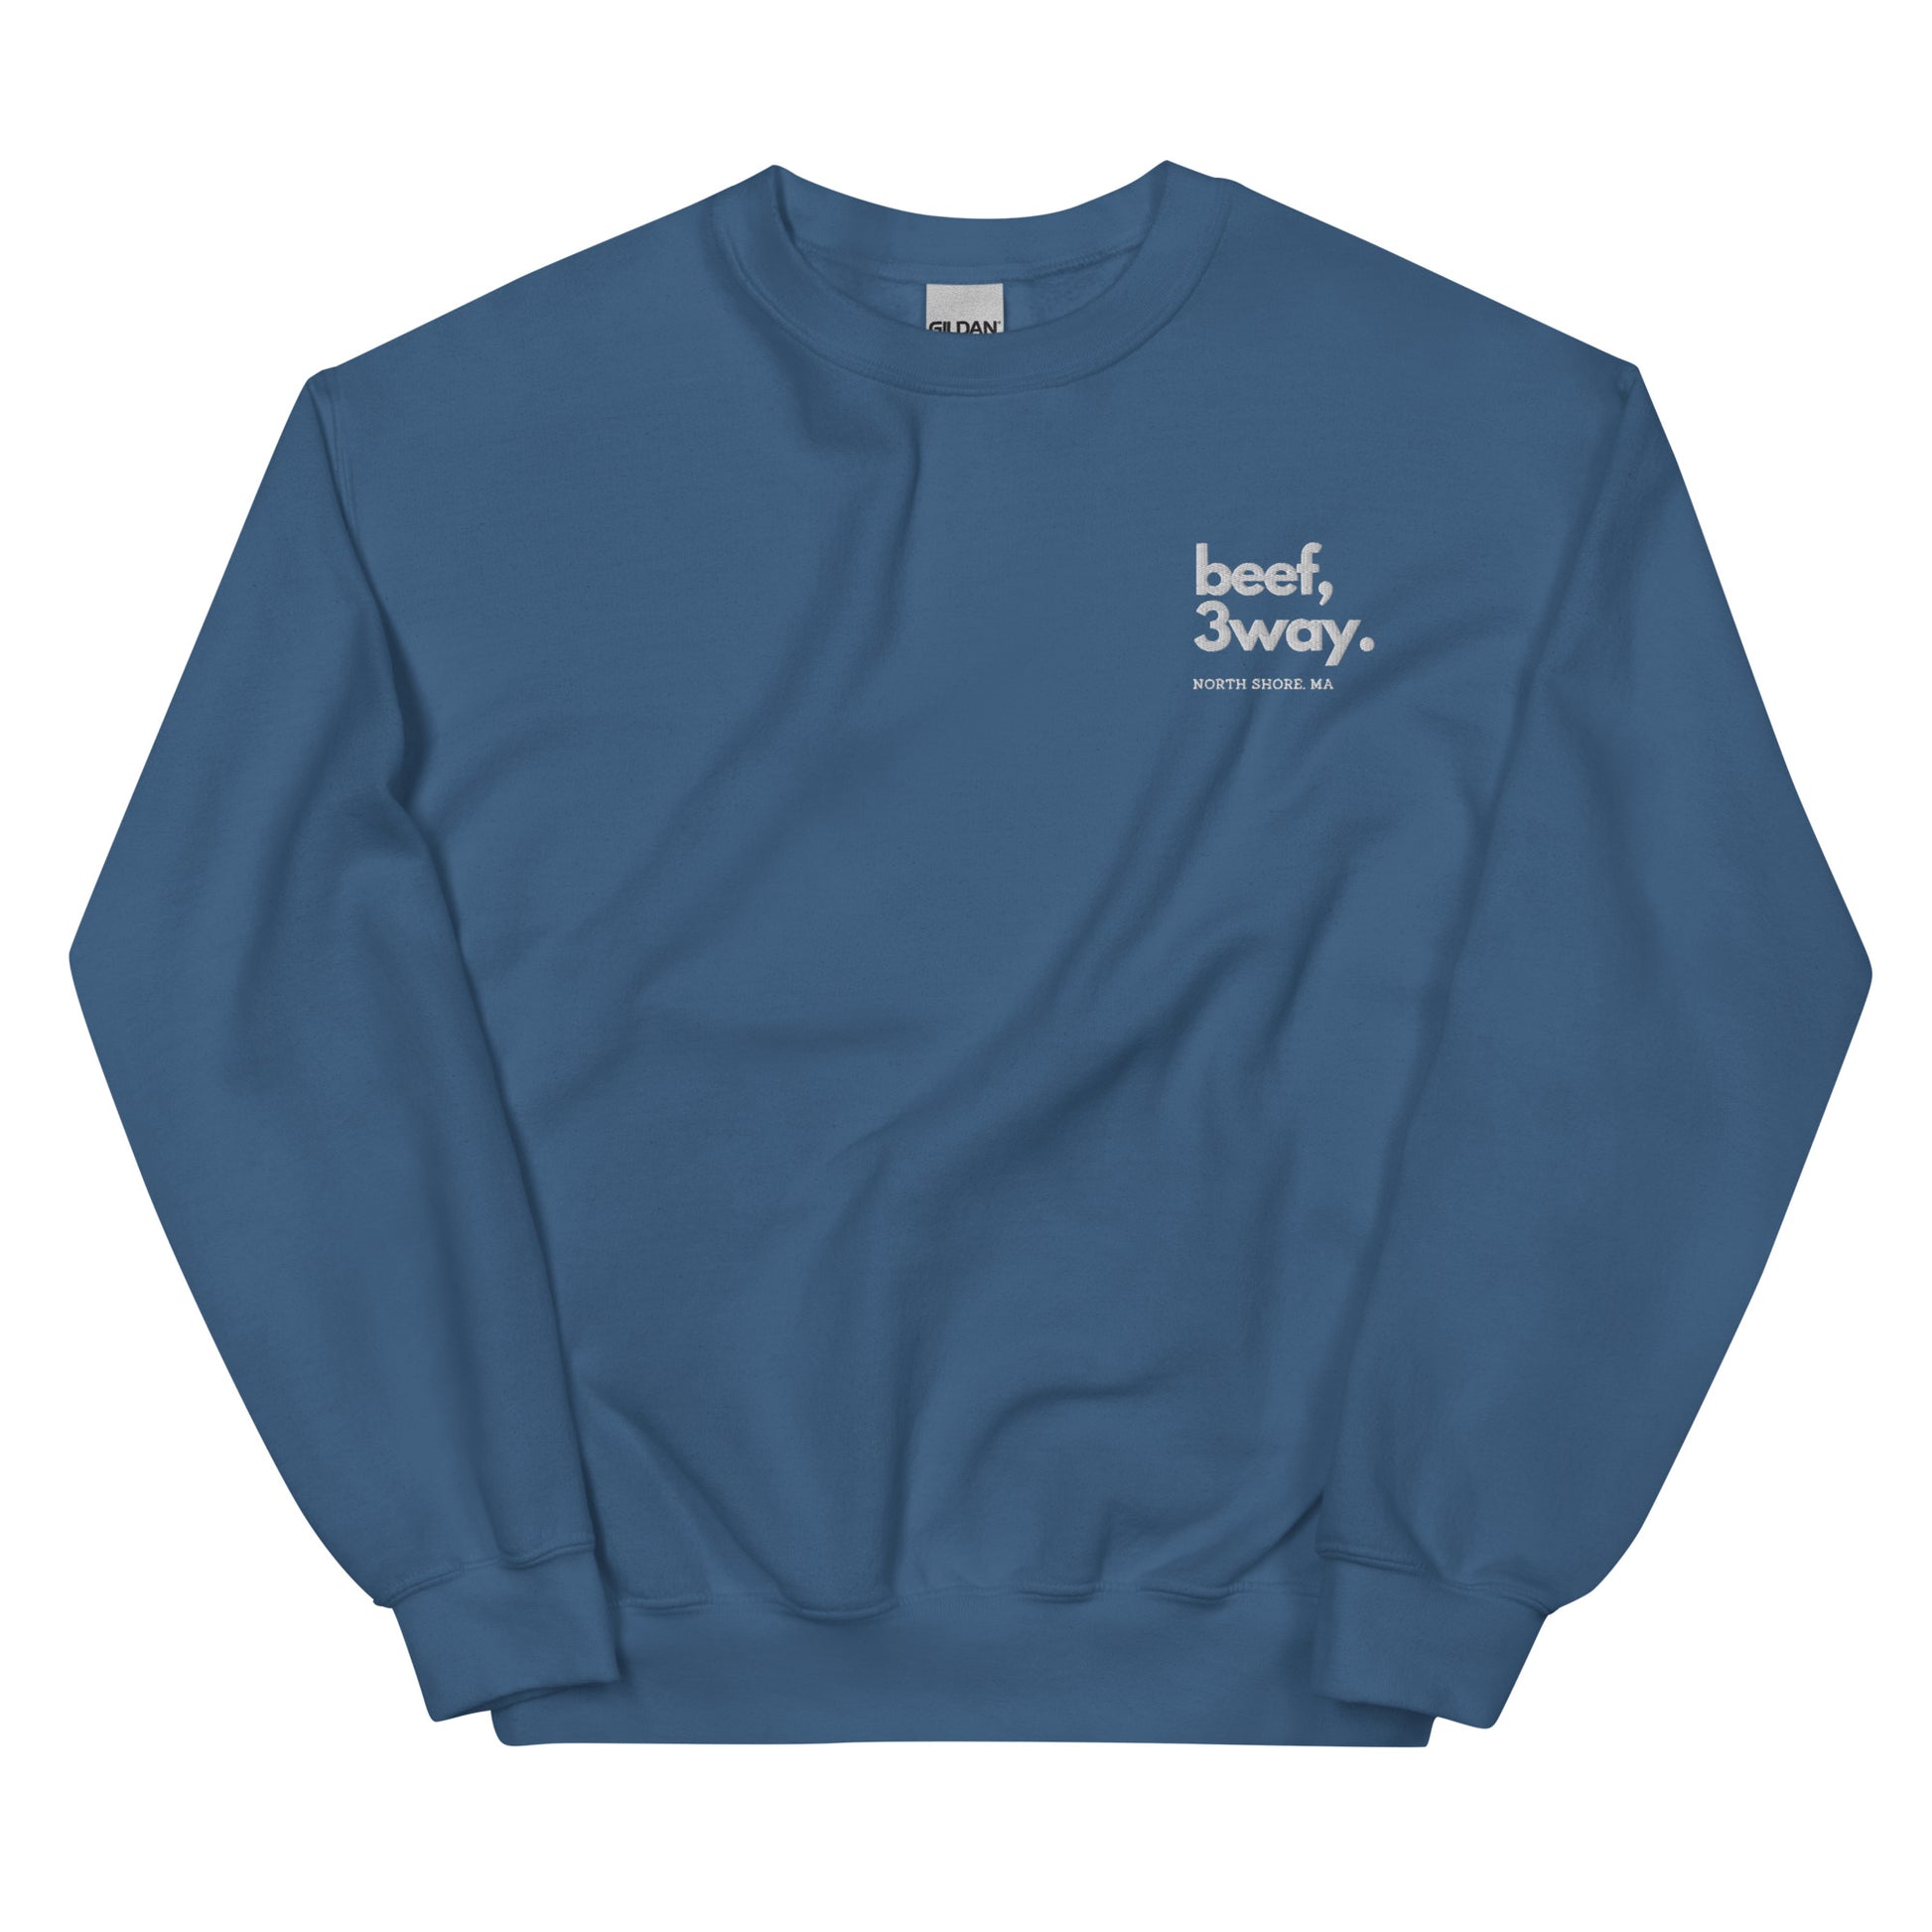 indigo crewneck that says "beef, 3way north shore ma" in white lettering